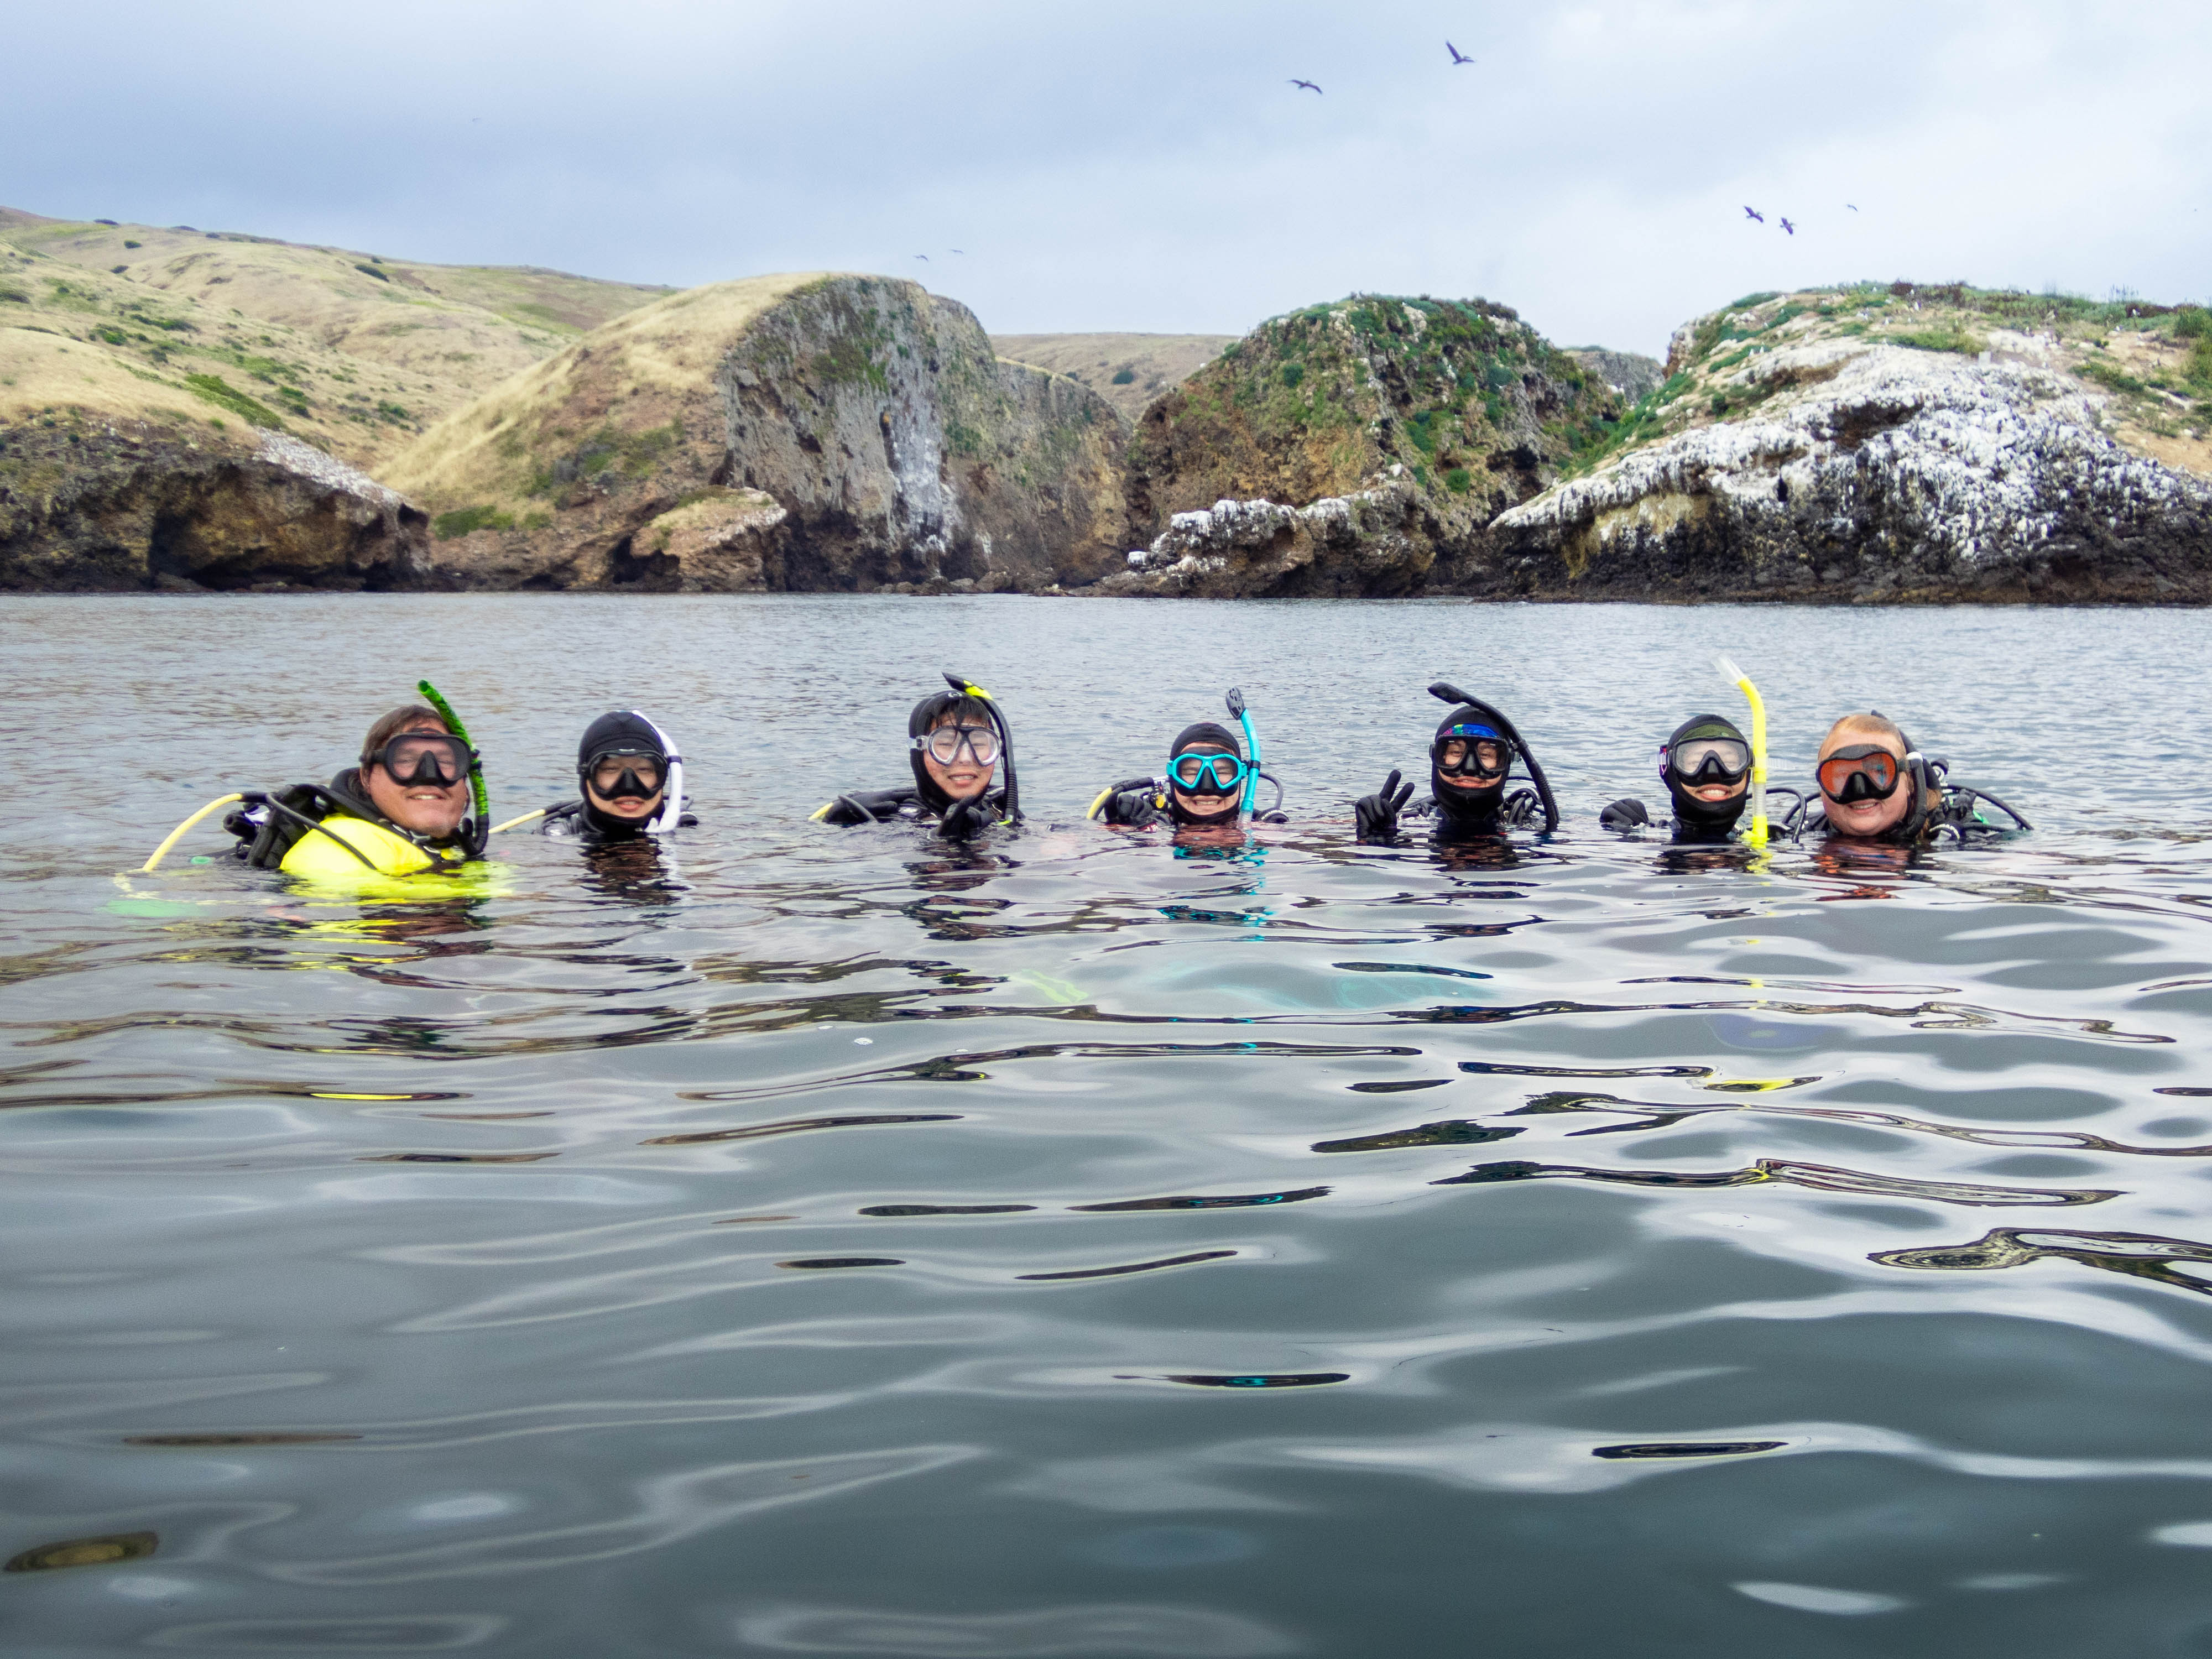 A group of seven scuba divers in wetsuits and snorkeling gear floating on the surface of the sea, with a rocky island in the background.